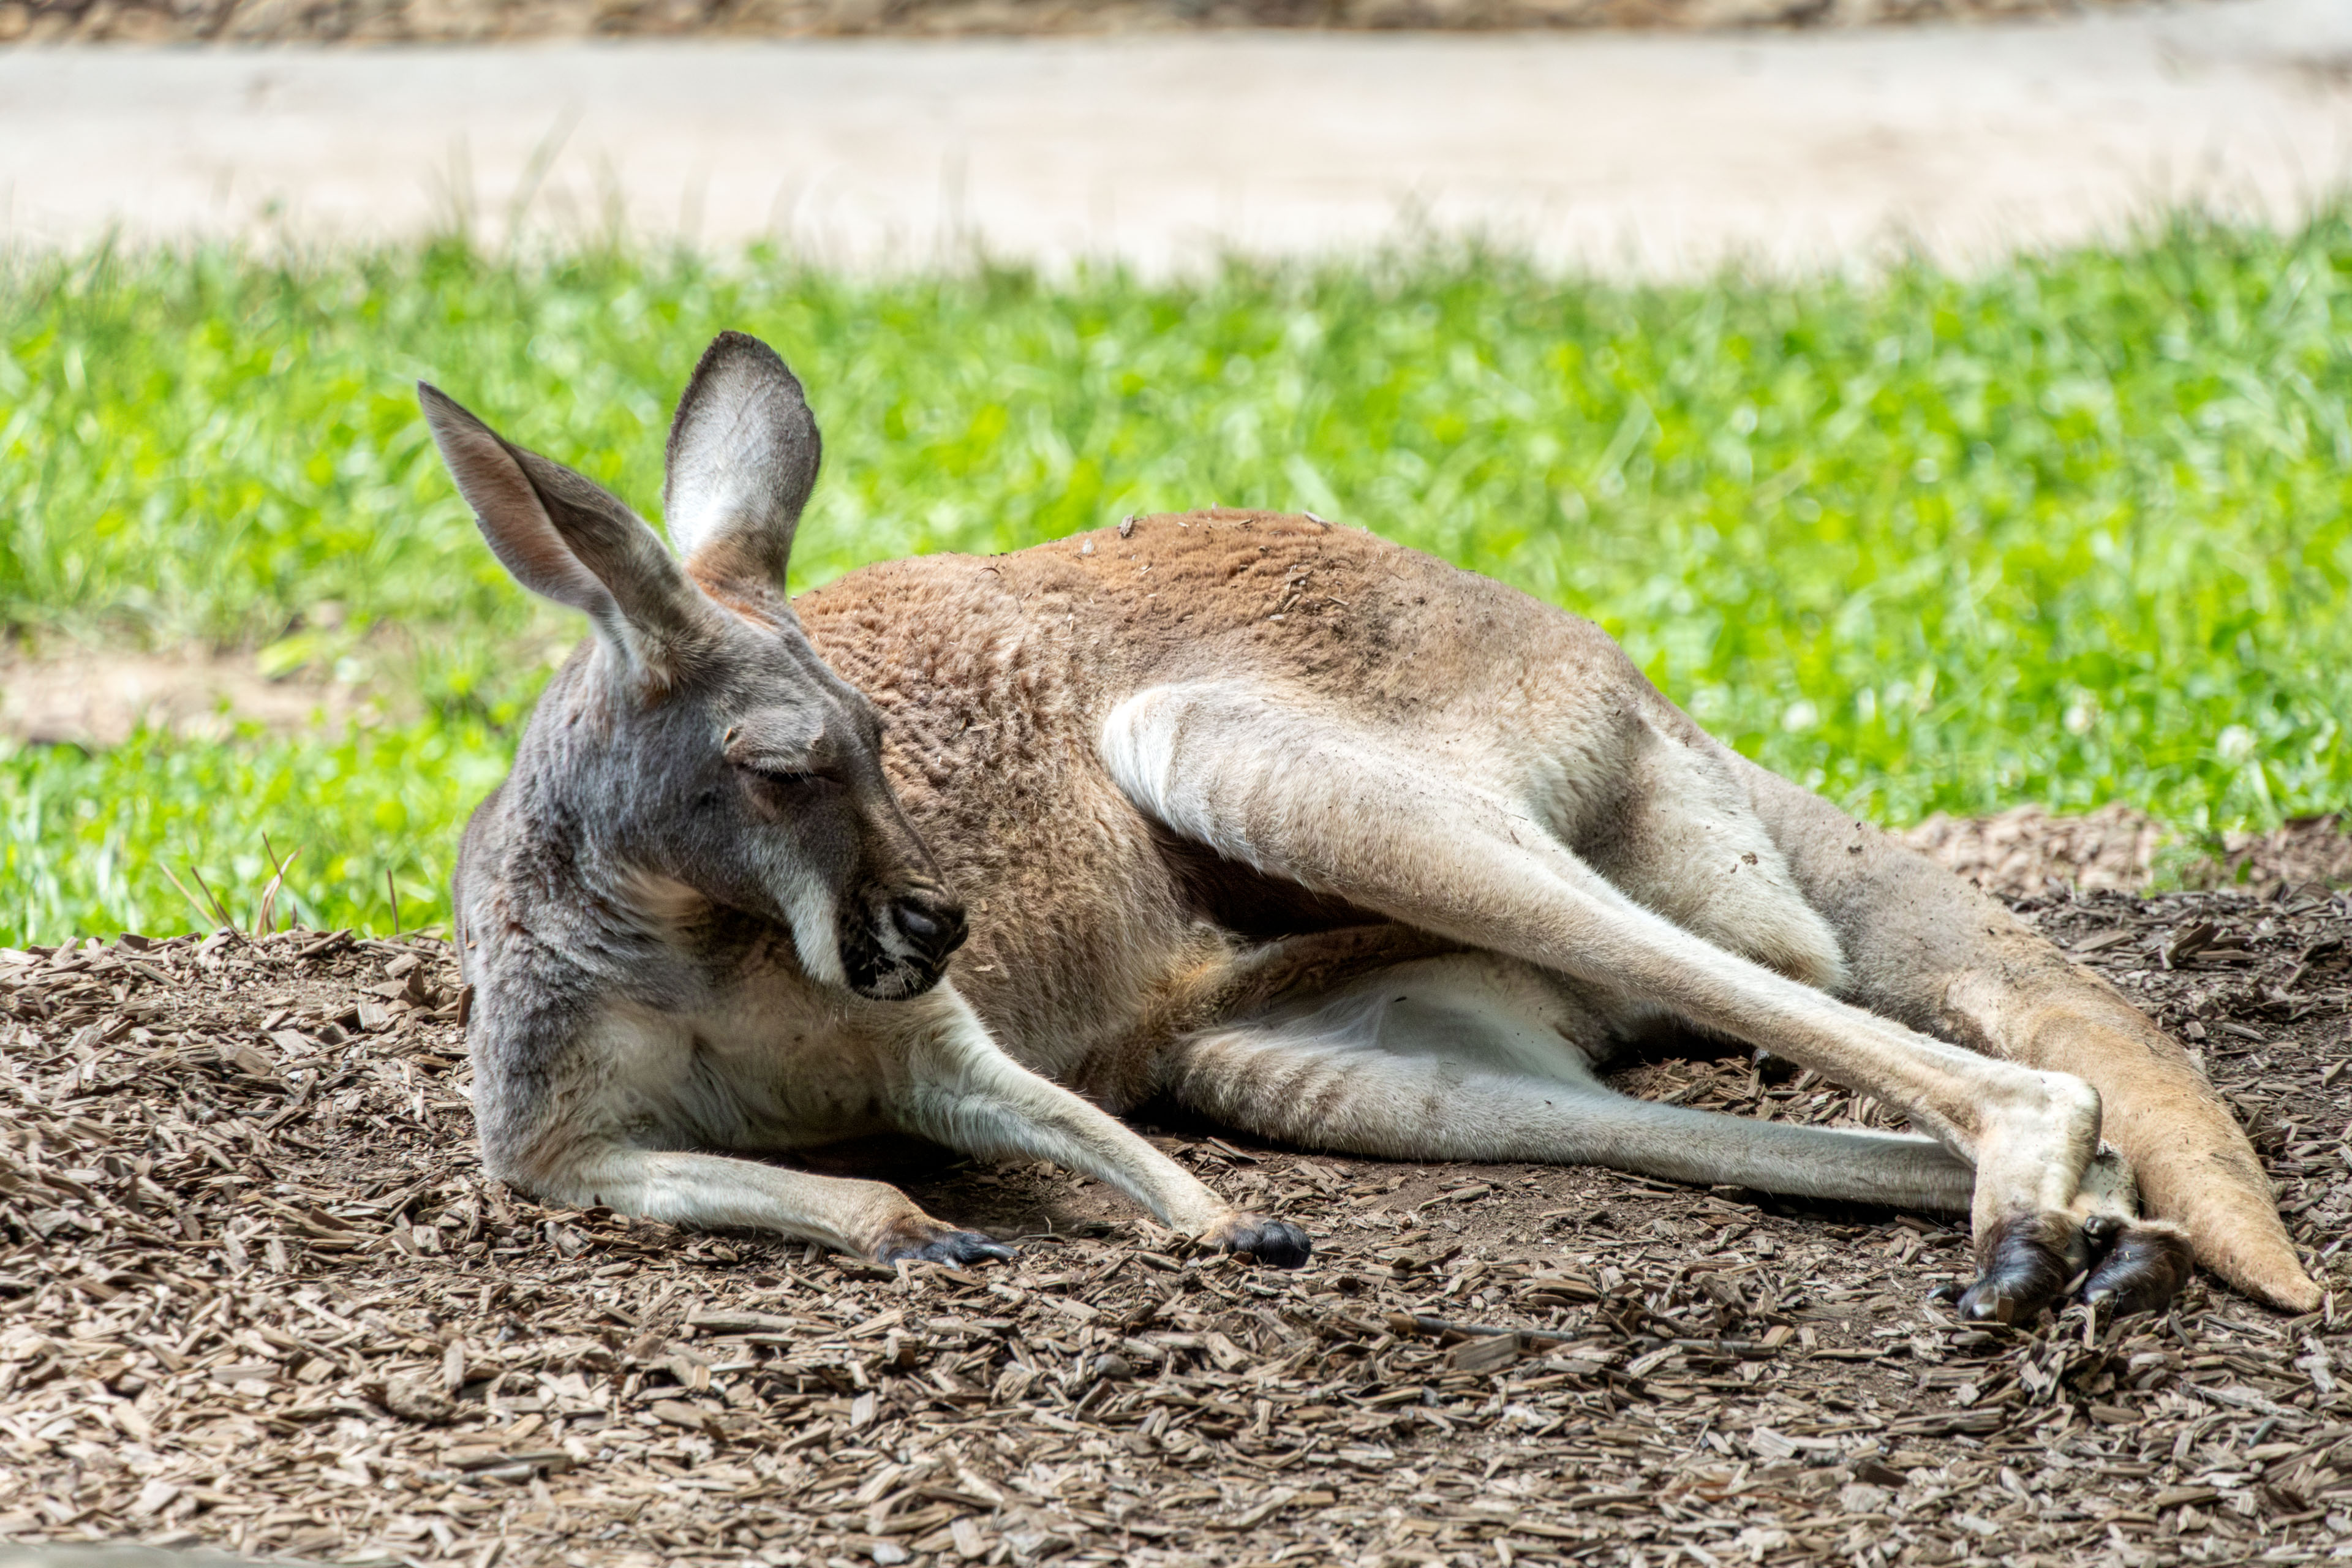 a wallaby lying on the grass